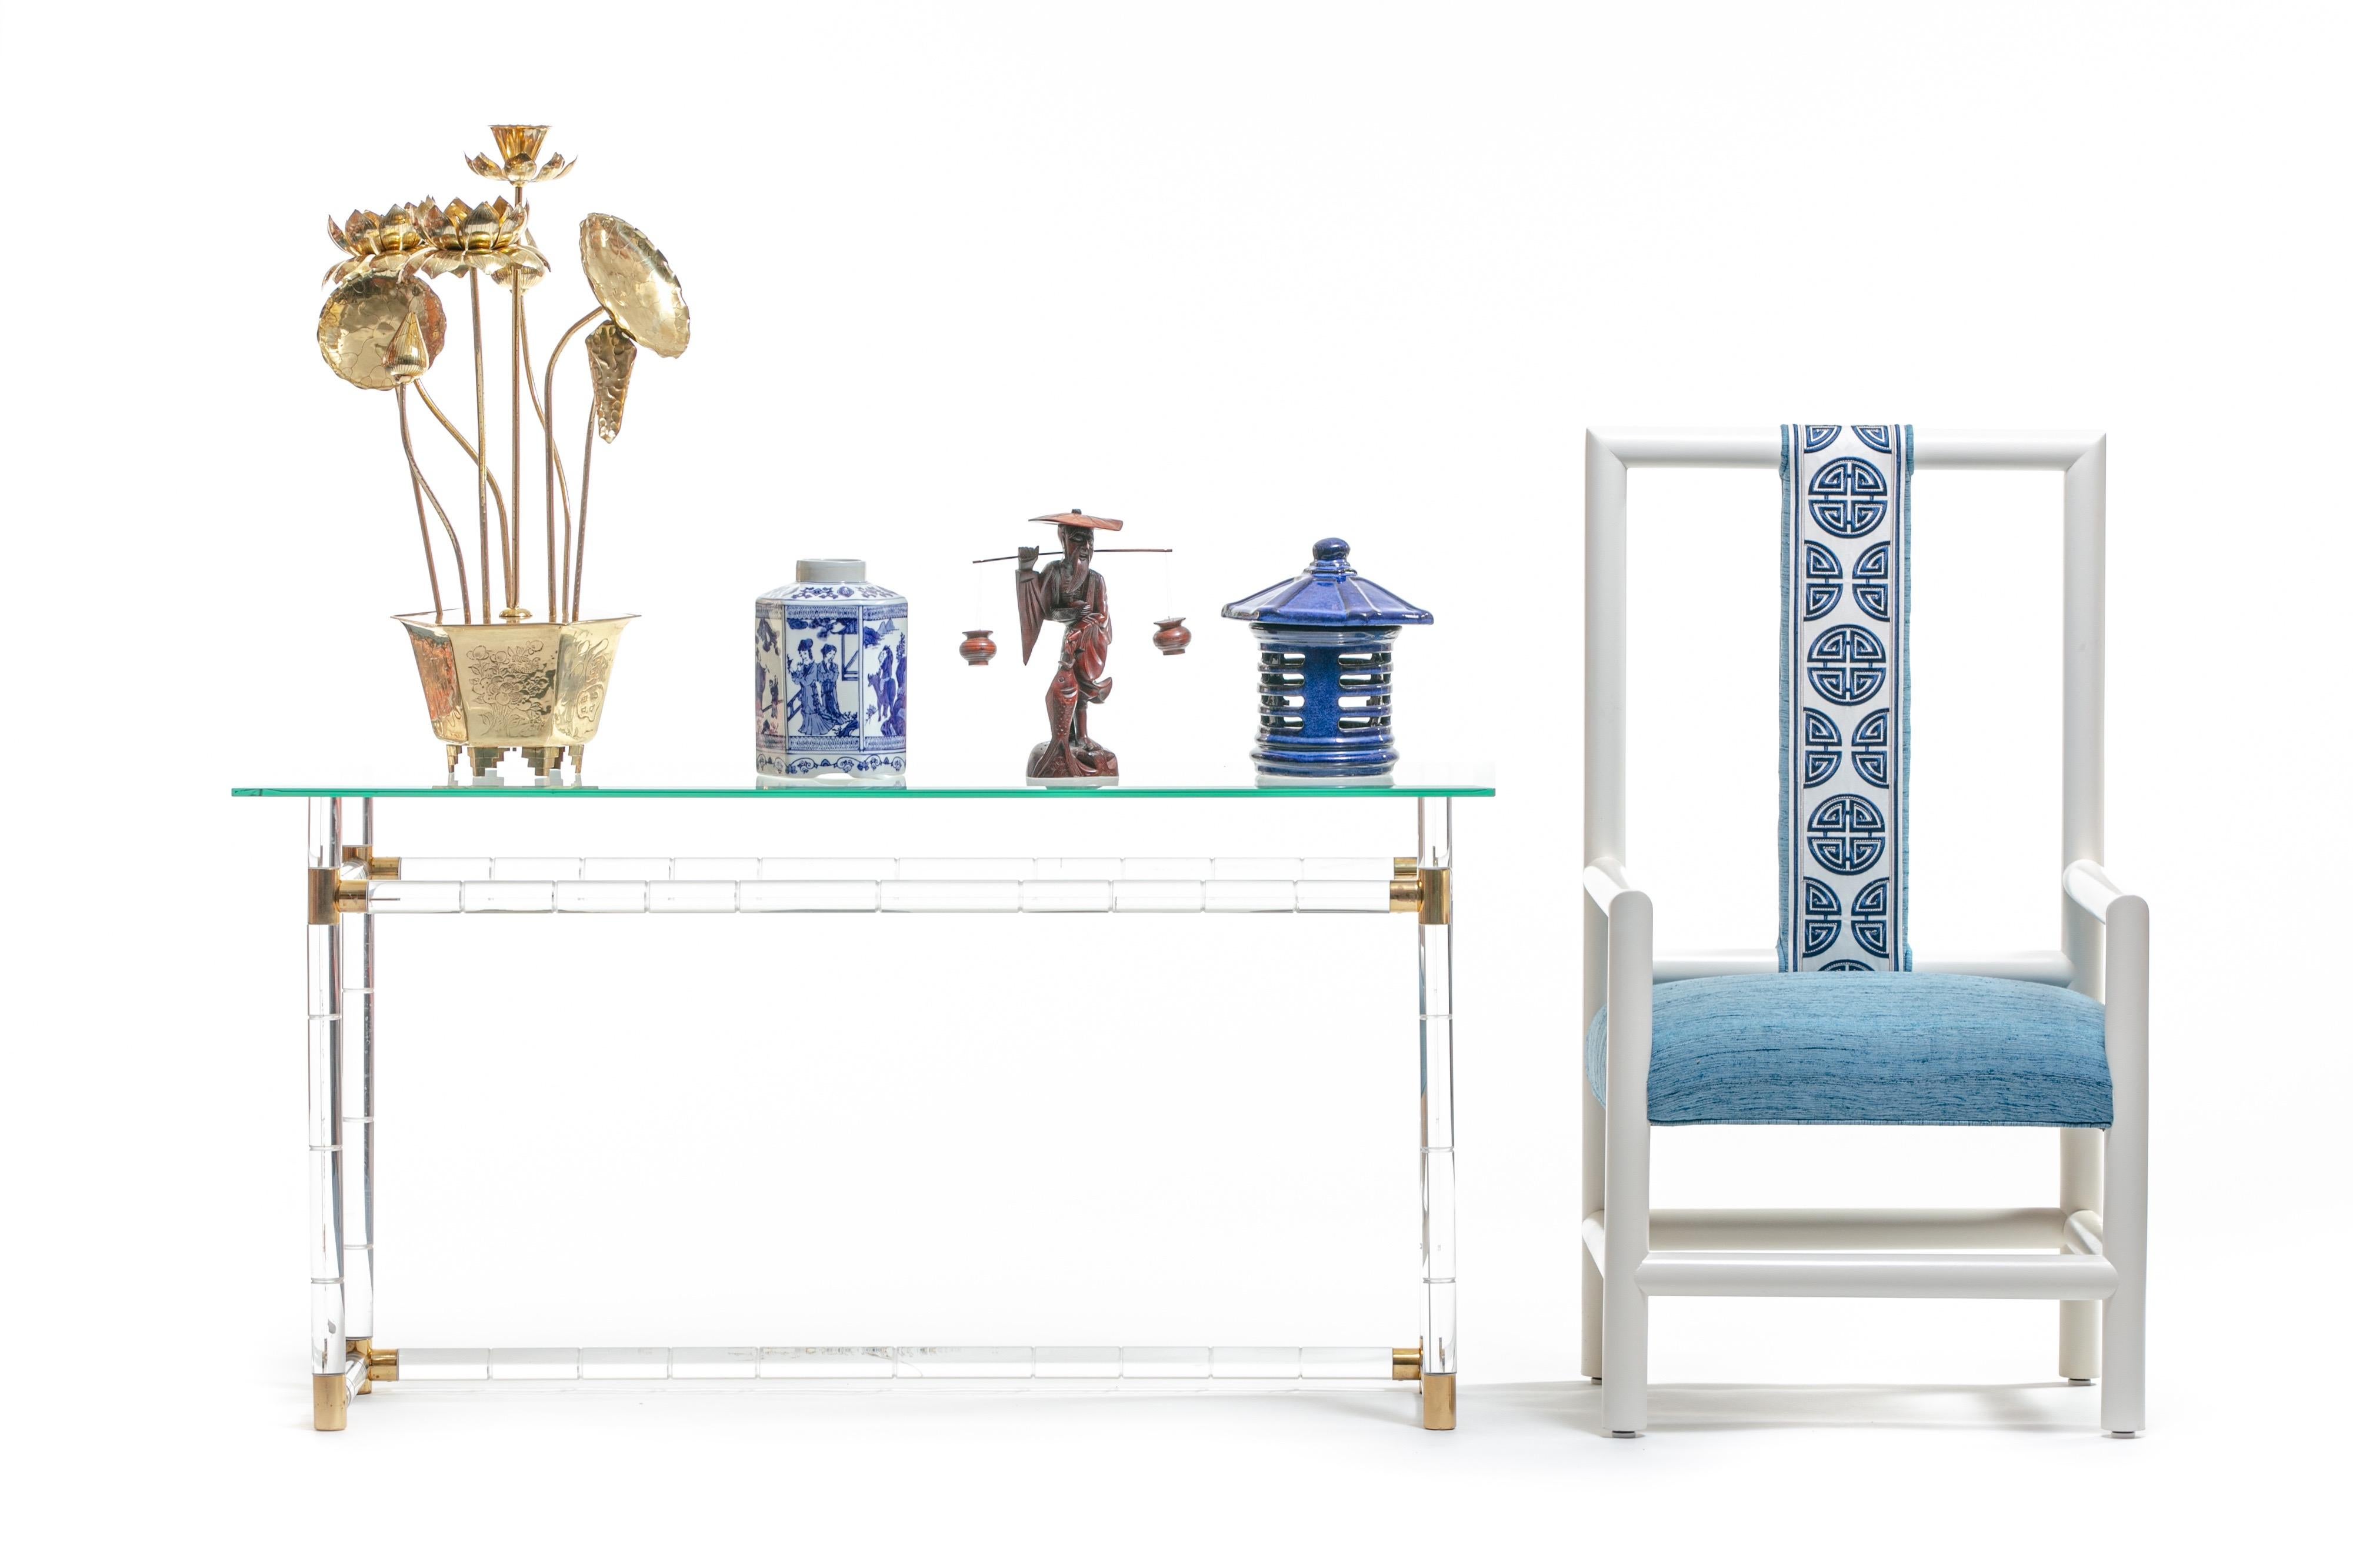 This beautiful high back dining or occasional chair was selected by Kelly Wearstler for her Miami project - The Viceroy Hotel - and later featured in Kelly Wearstler's book, HUE. Inspired by Chinese blue and white porcelain, our shop re-imagined